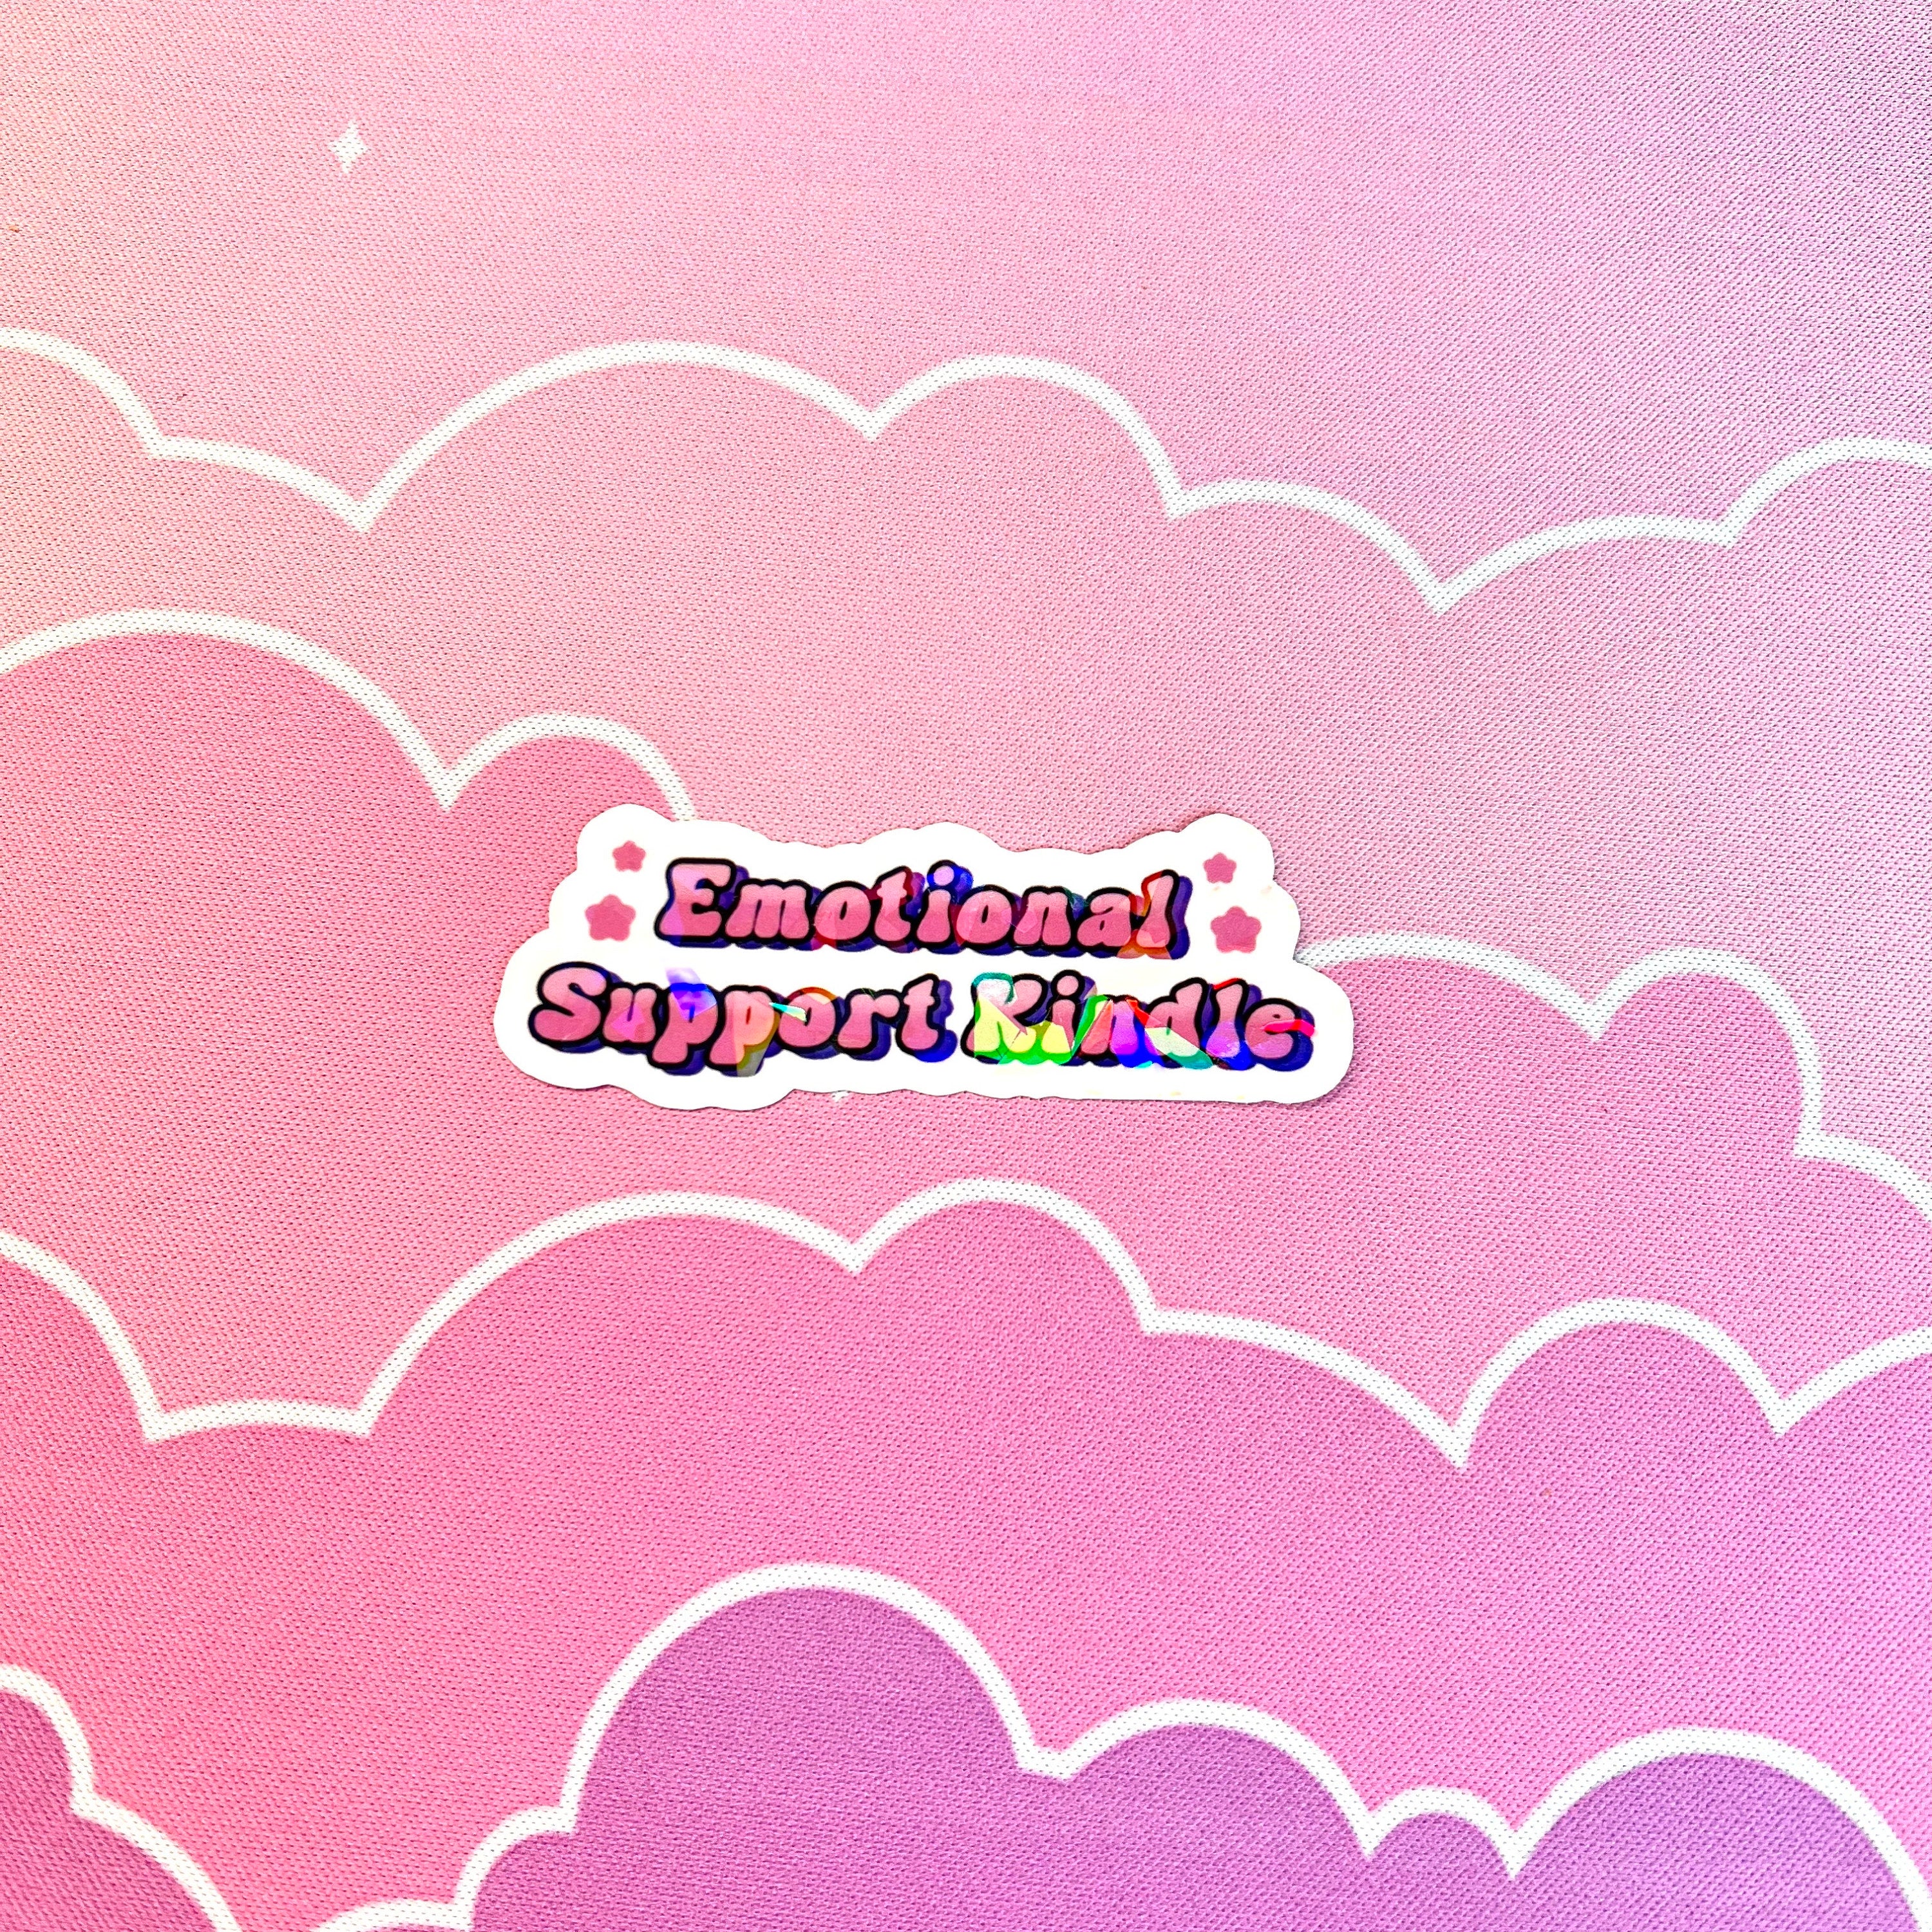 pink emotional support kindle sticker holographic bookish sticker kindle stickers books lover gifts booktok books sticker smut stickers